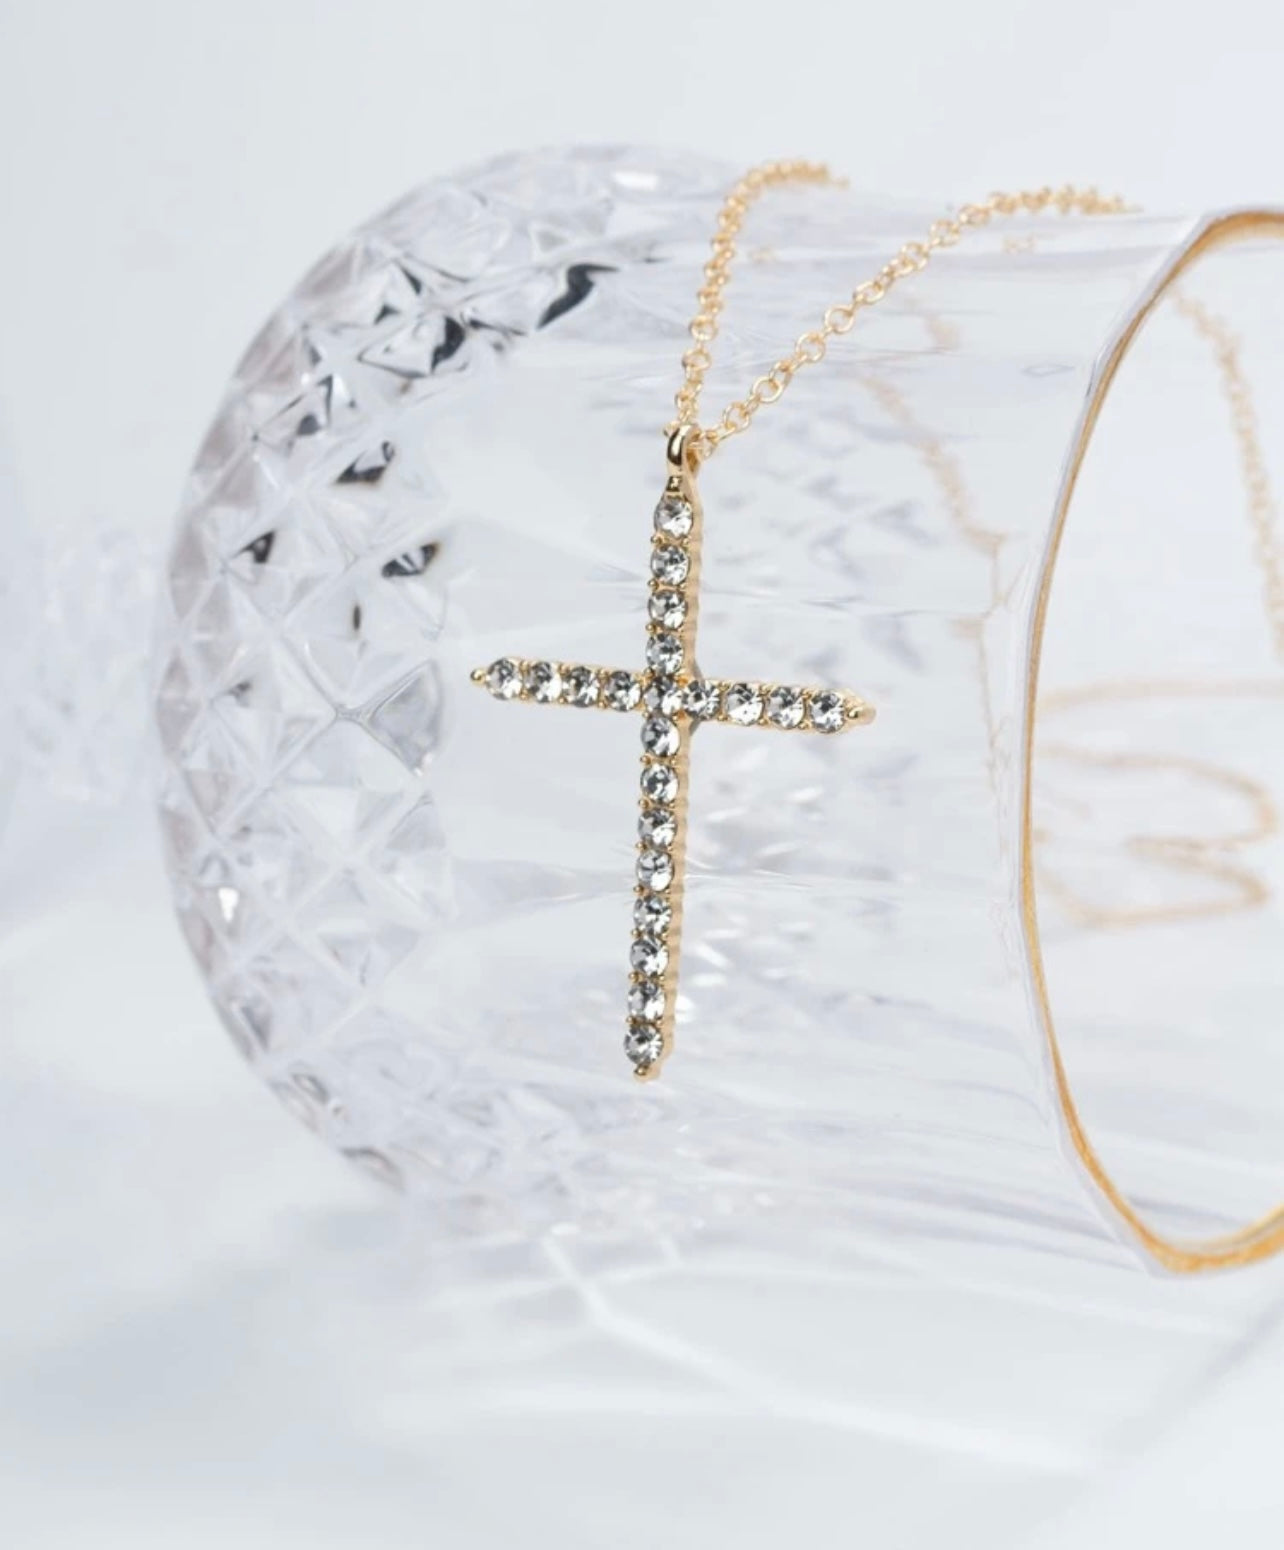 Beautiful Gold or Silver Crystal Cross Necklace